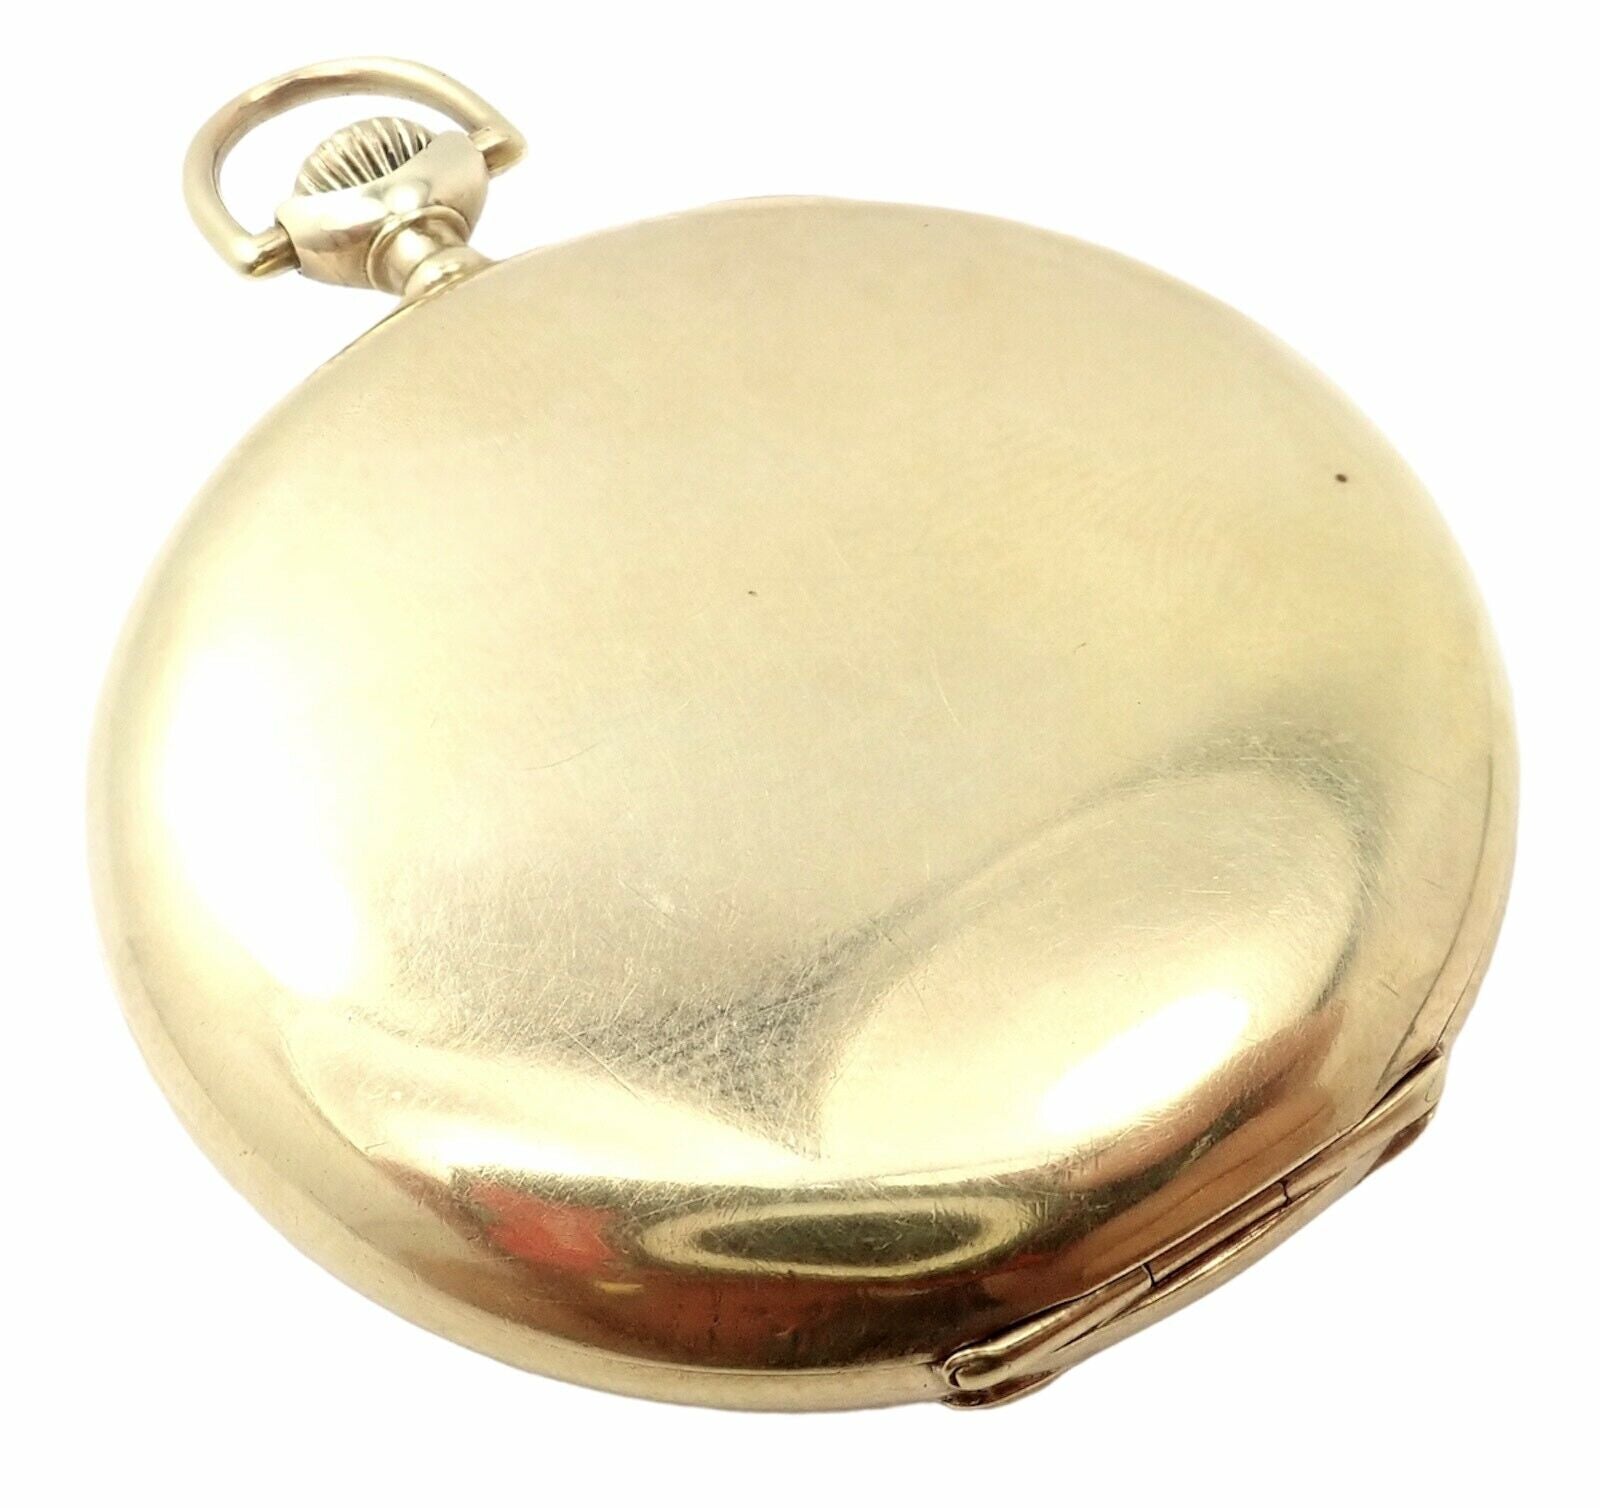 Howard Jewelry & Watches:Watches, Parts & Accessories:Watches:Pocket Watches Vintage Howard 14k Yellow Gold 46mm 17j Pocket Watch c. 1920's